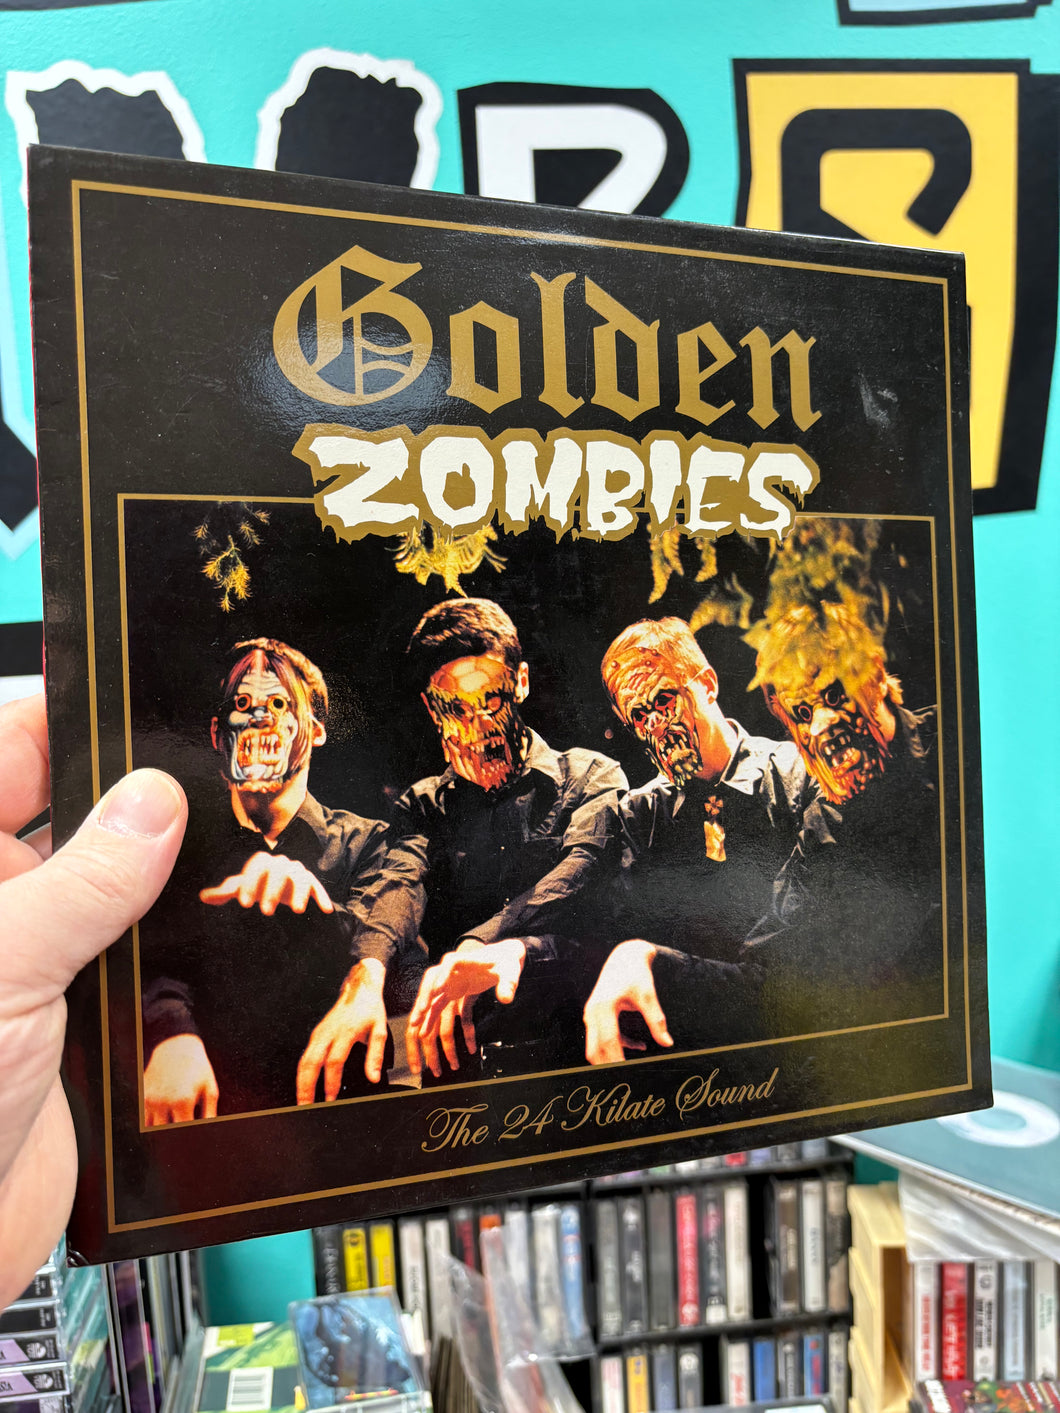 Los Golden Zombies: The 24 Kilate Sound, 10inch, Spain 2000